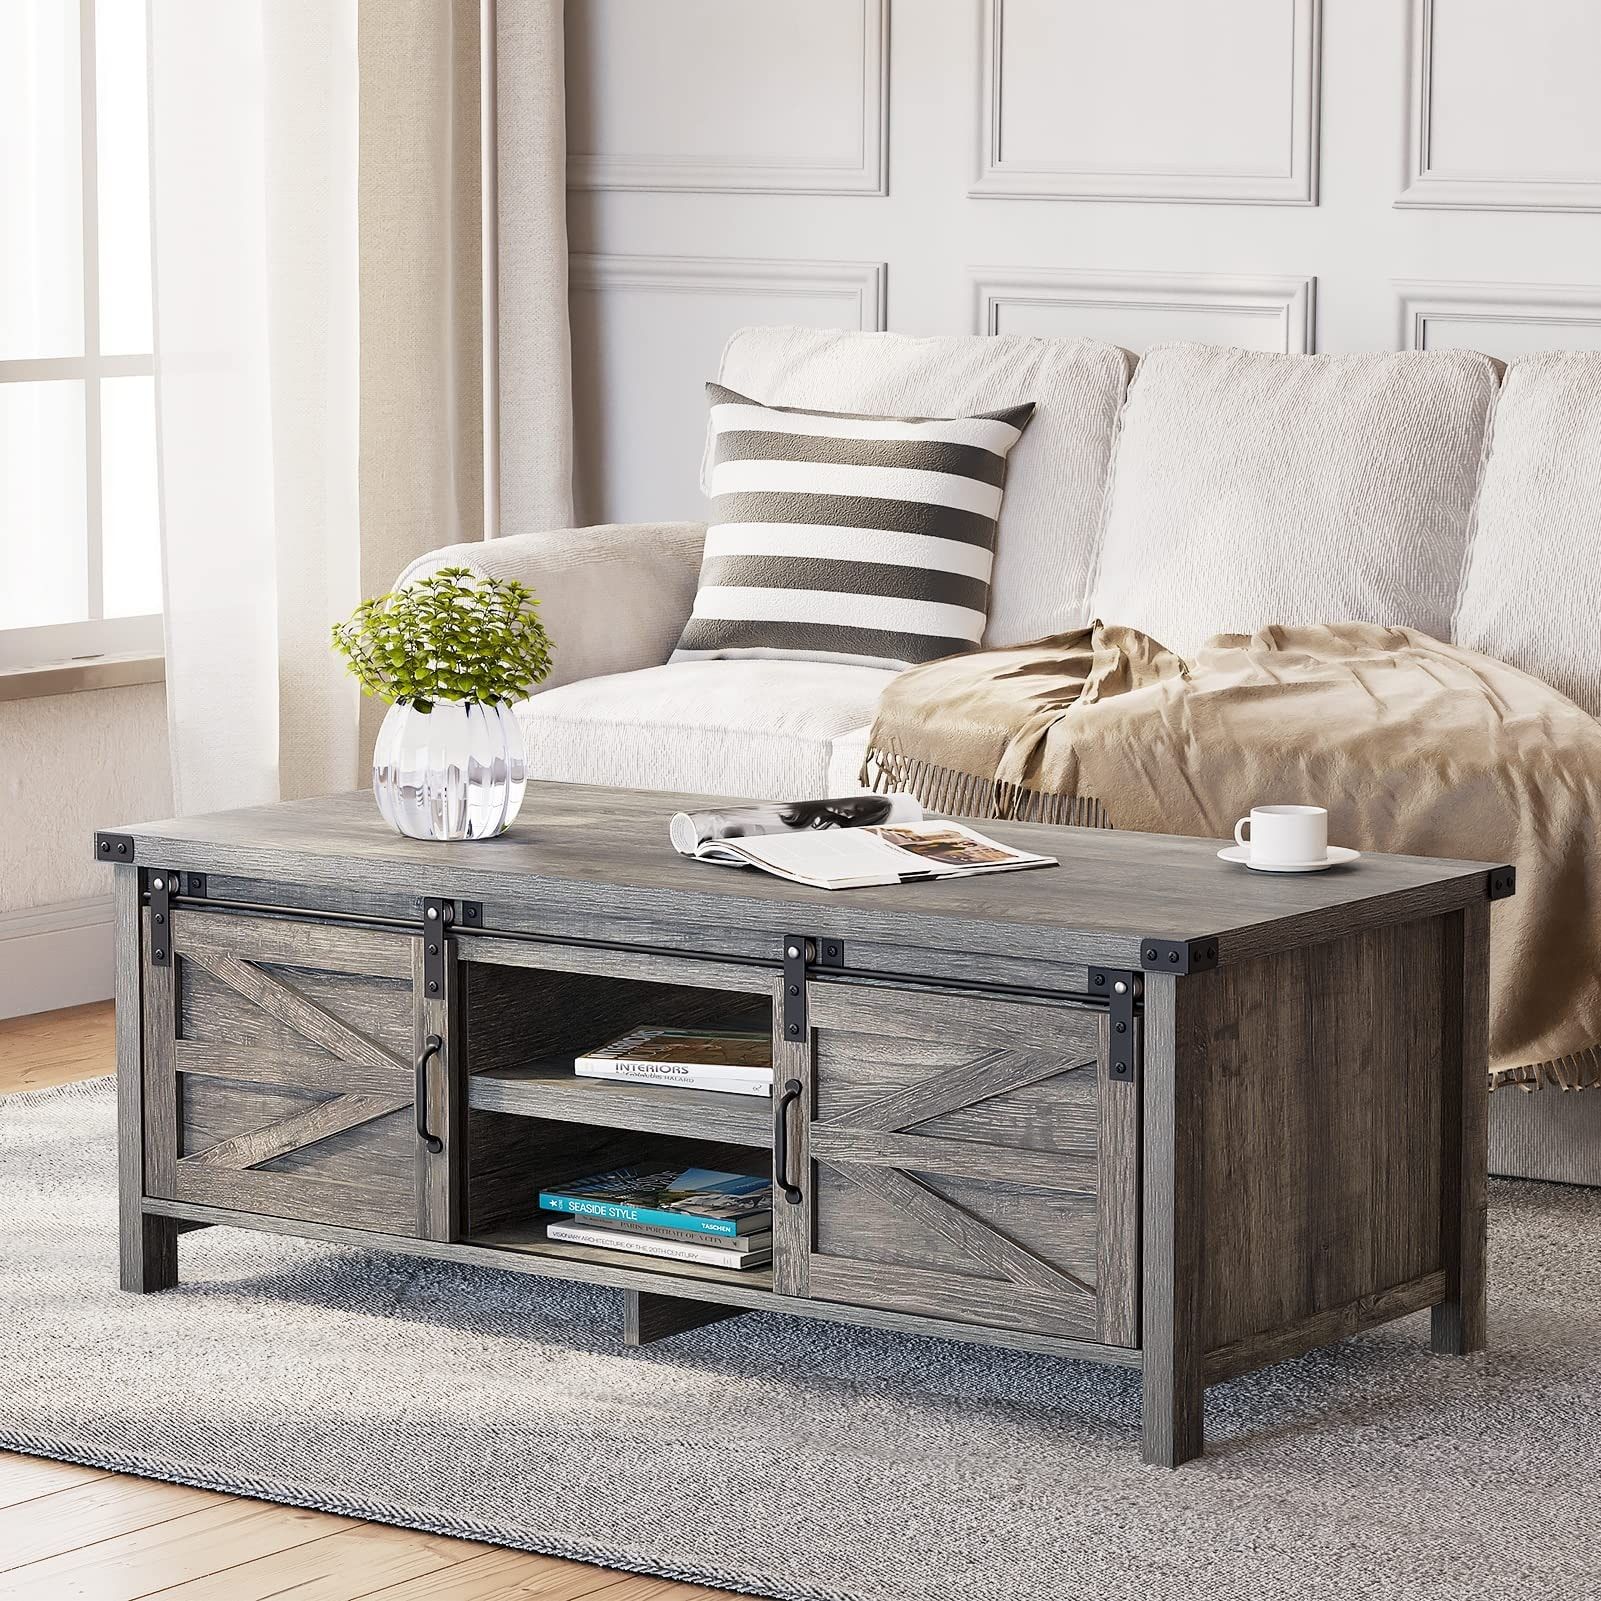 Farmhouse Coffee Table With Sliding Barn Doors & Storage, Grey Rustic  Wooden Center Rectangular Tables – Bed Bath & Beyond – 37841722 With Regard To Coffee Tables With Sliding Barn Doors (View 2 of 15)